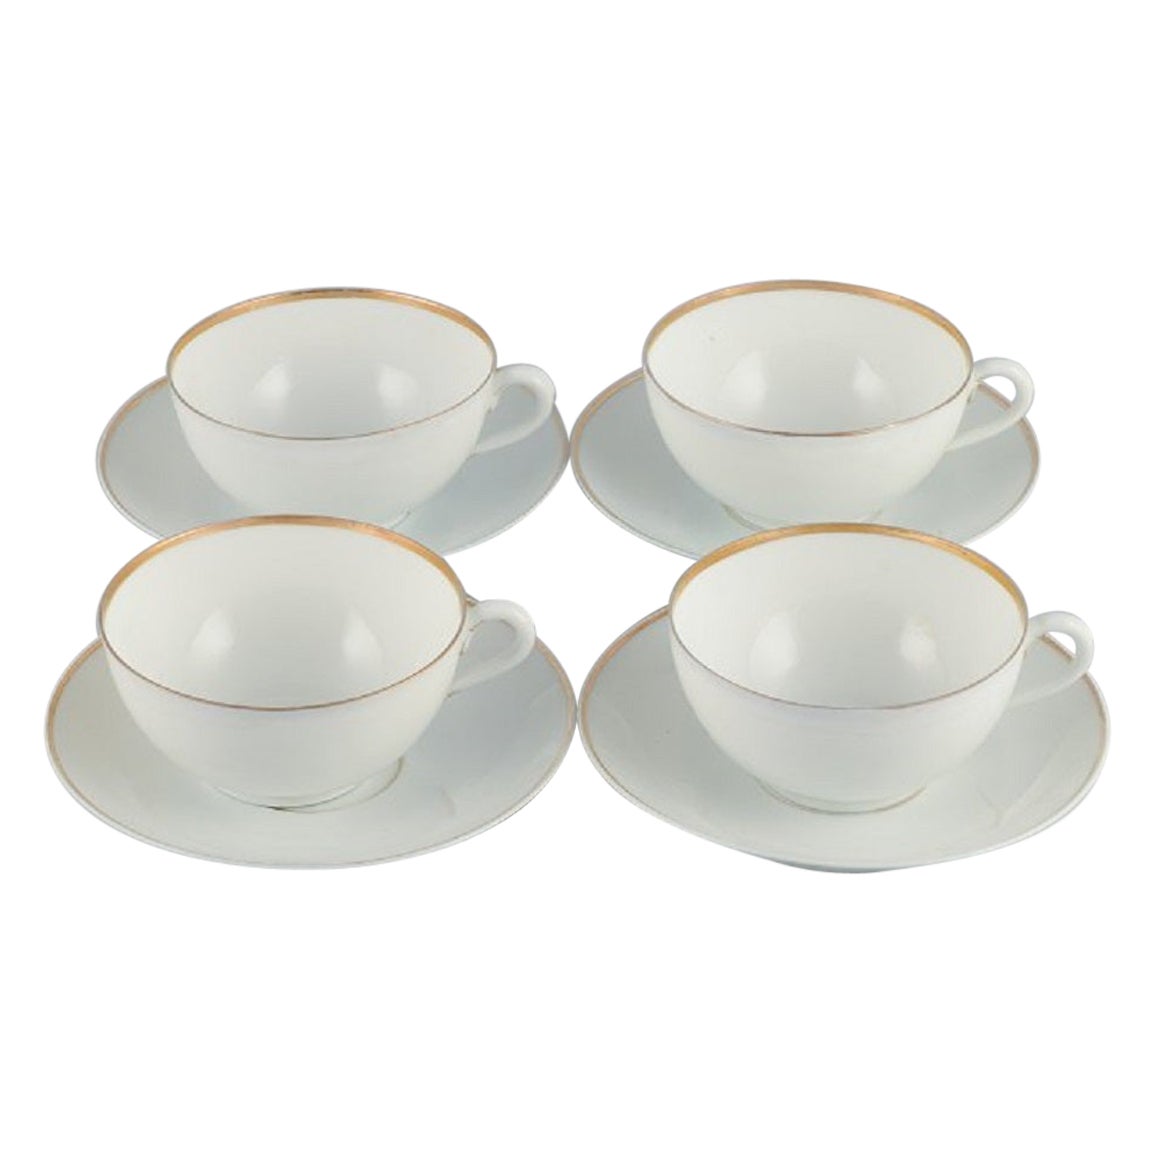 Rosenthal, Germany, a Set of Four Large Teacups and Matching Porcelain Saucers For Sale